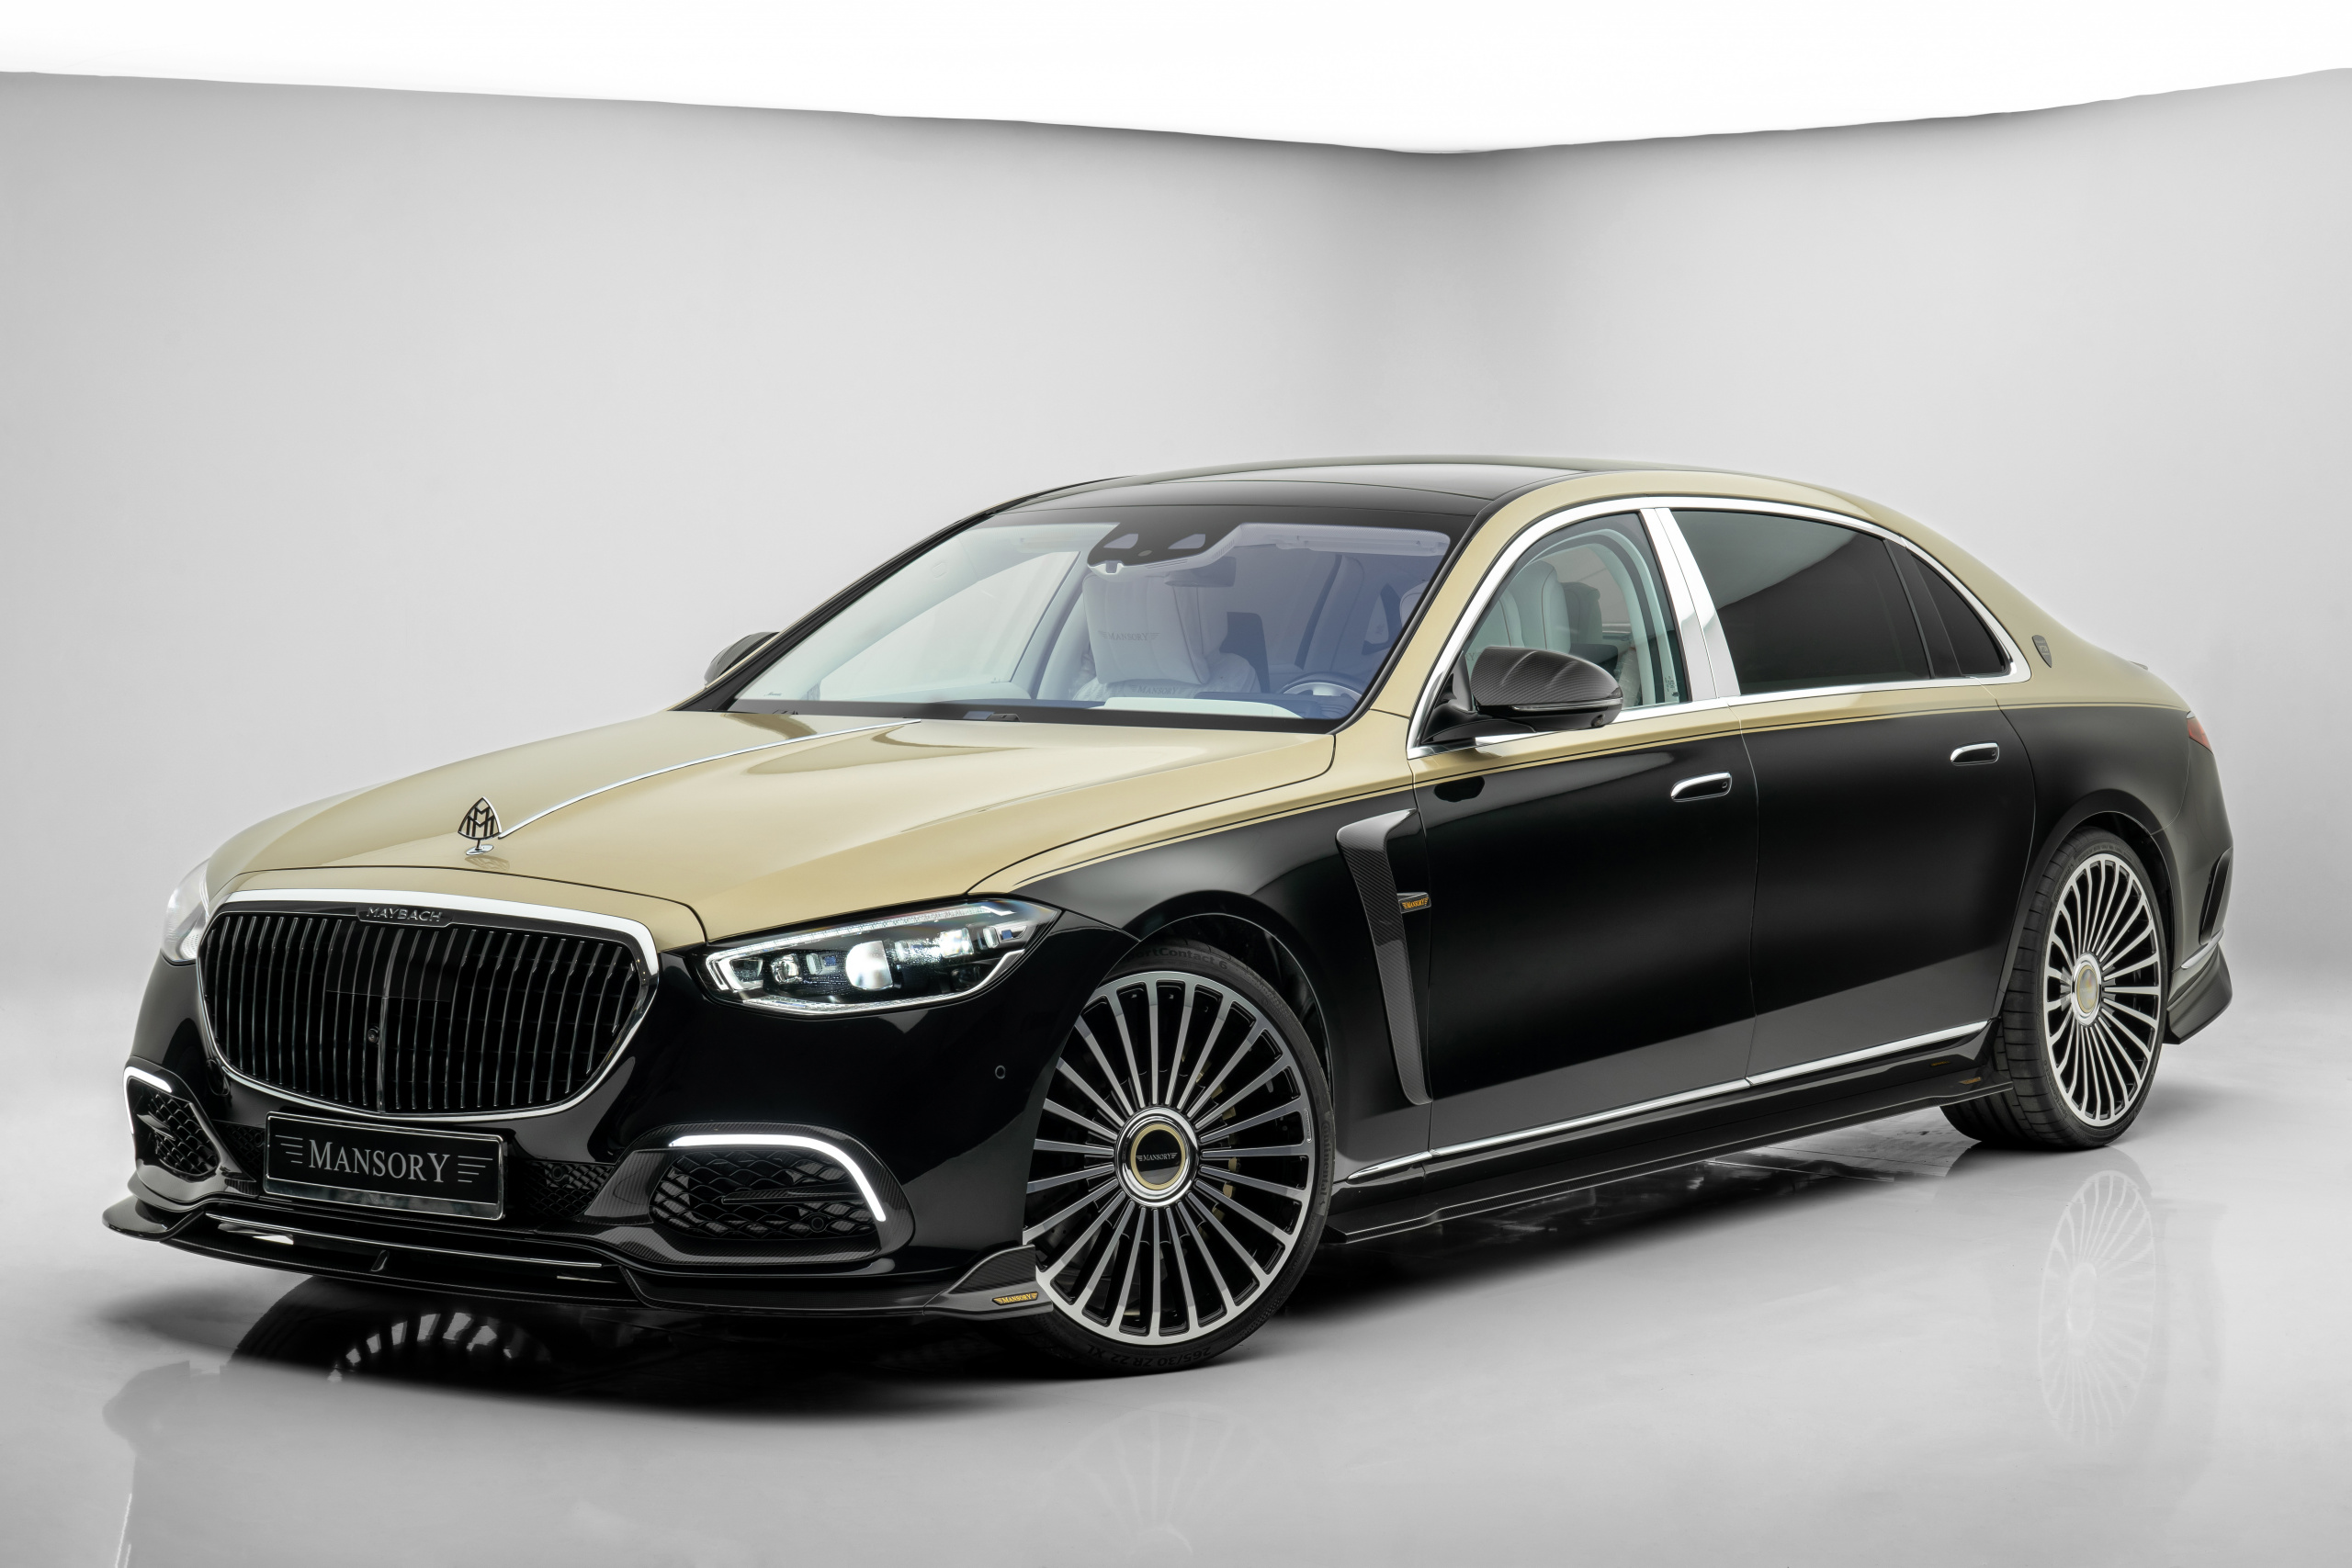 https://www.mansory.com/sites/default/files/styles/1920x_fullwidth_image/public/2022-07/mansory-maybach-s-class-01.jpg?itok=mD2wCnaa